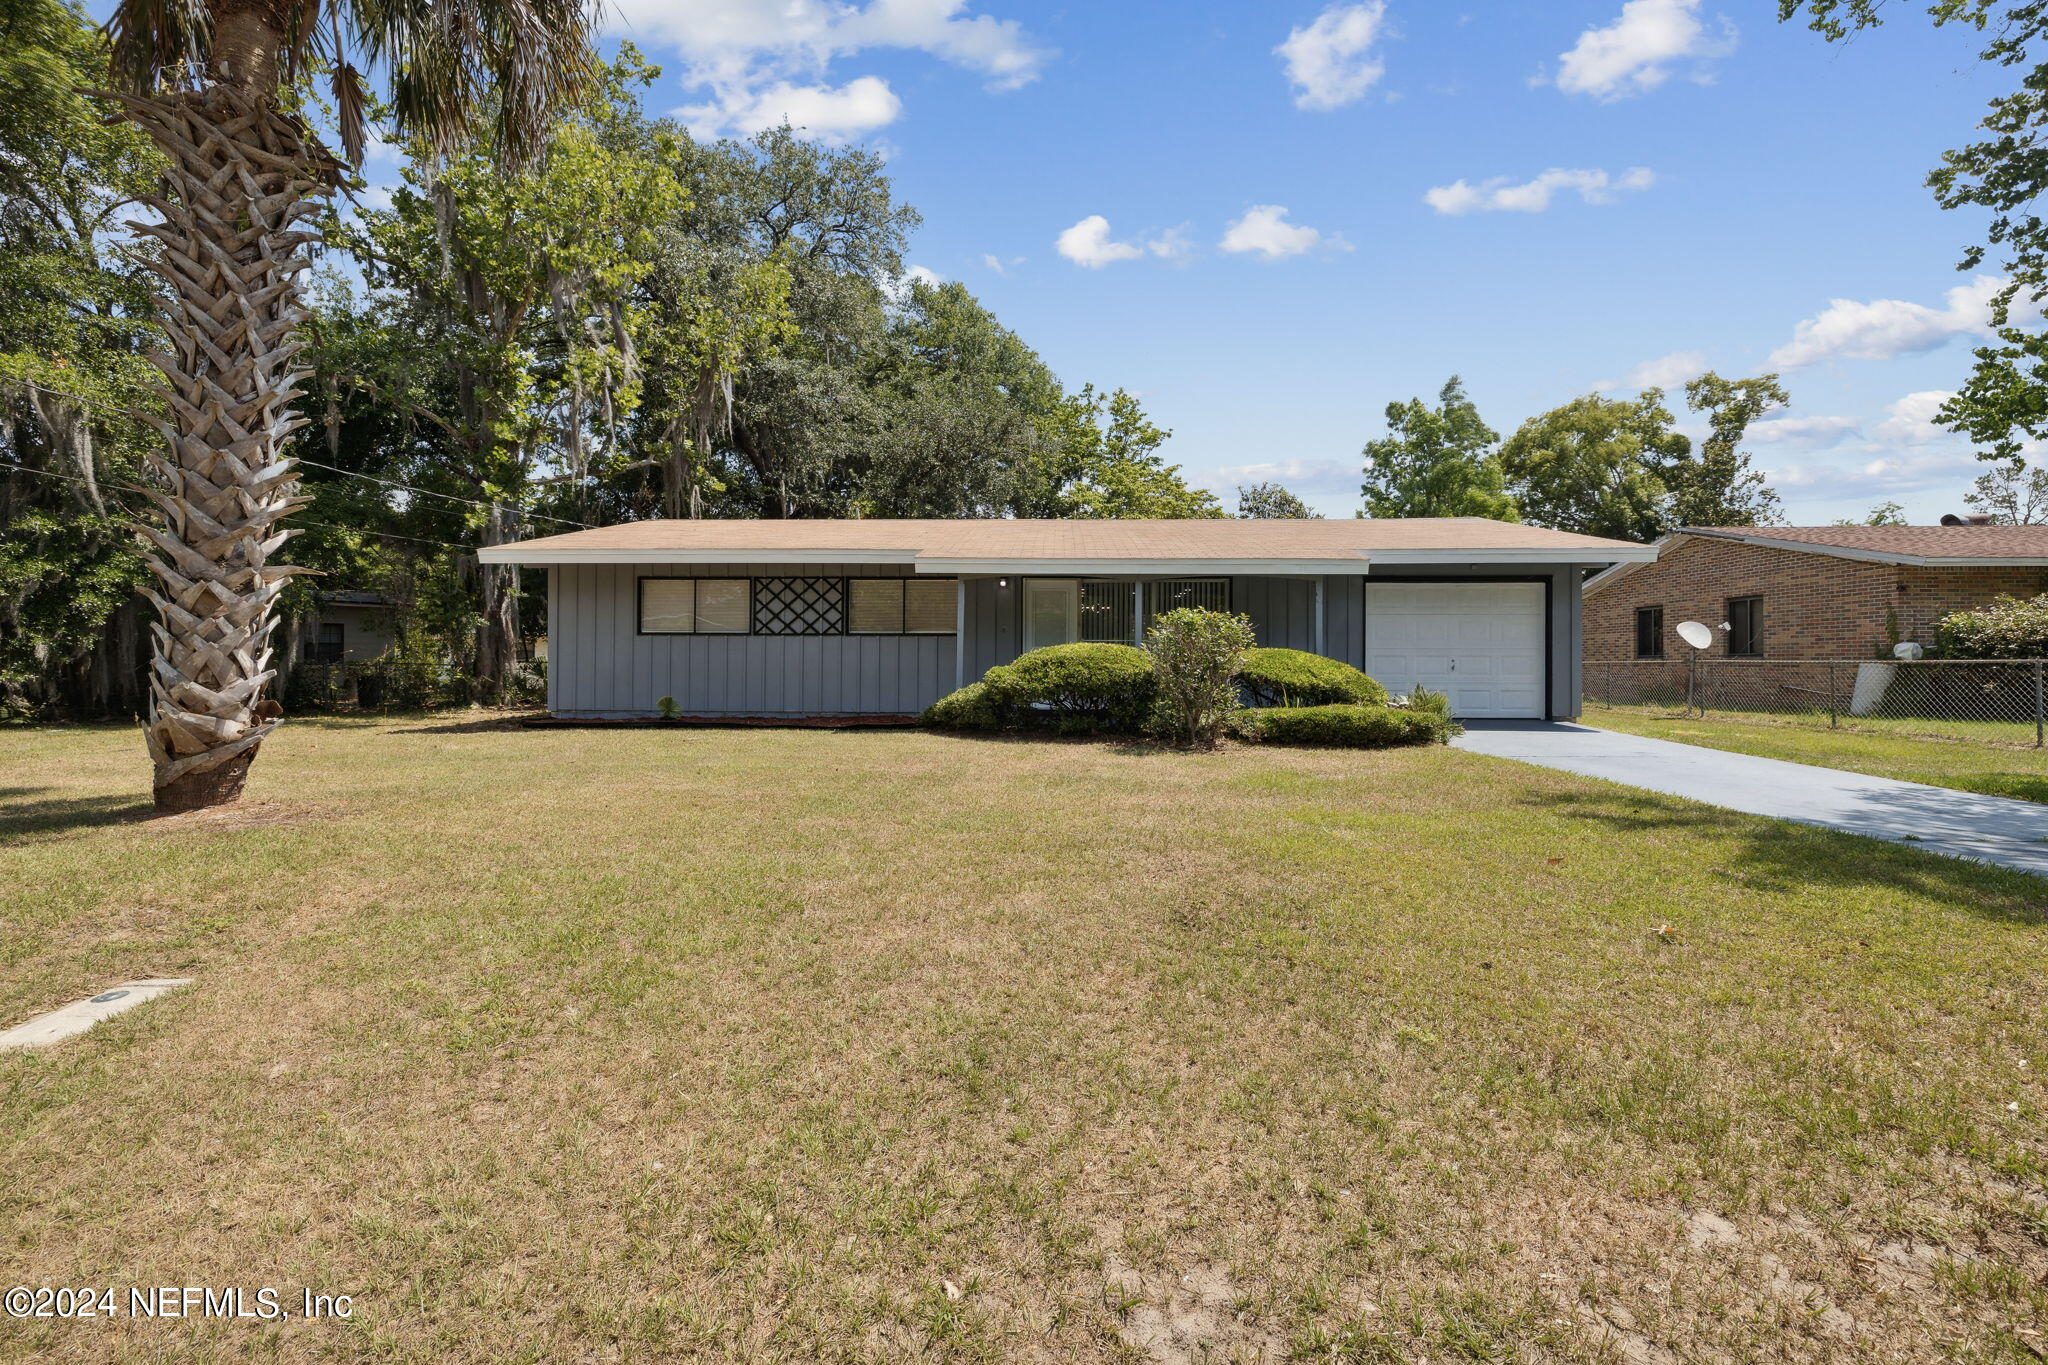 Jacksonville, FL home for sale located at 6931 Corday Road, Jacksonville, FL 32208